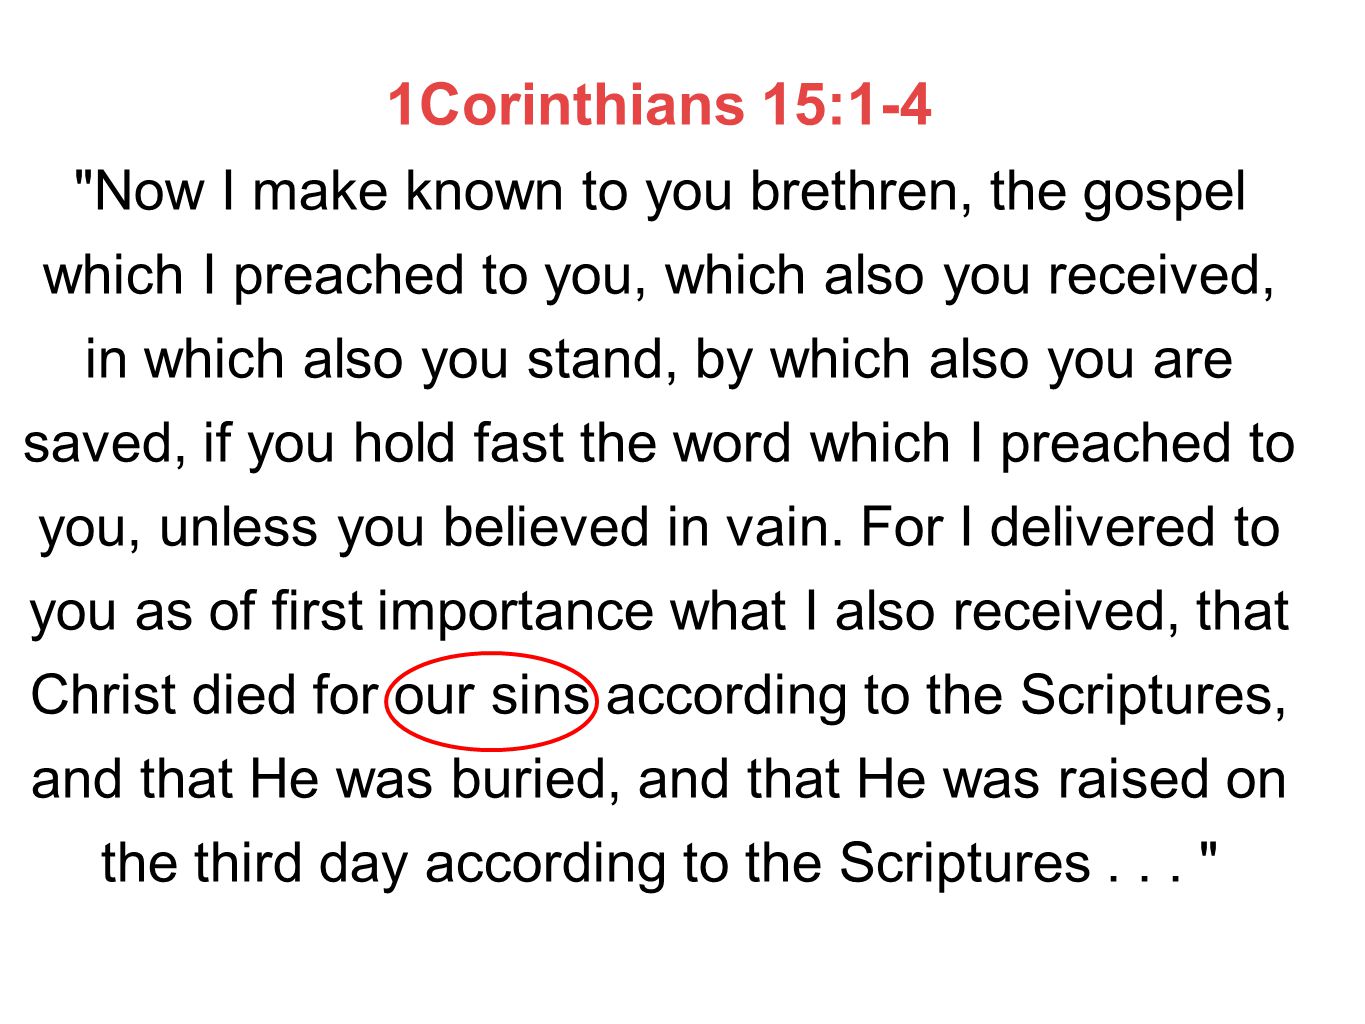 1Corinthians 15:1-4 Now I make known to you brethren, the gospel which I preached to you, which also you received, in which also you stand, by which also you are saved, if you hold fast the word which I preached to you, unless you believed in vain.